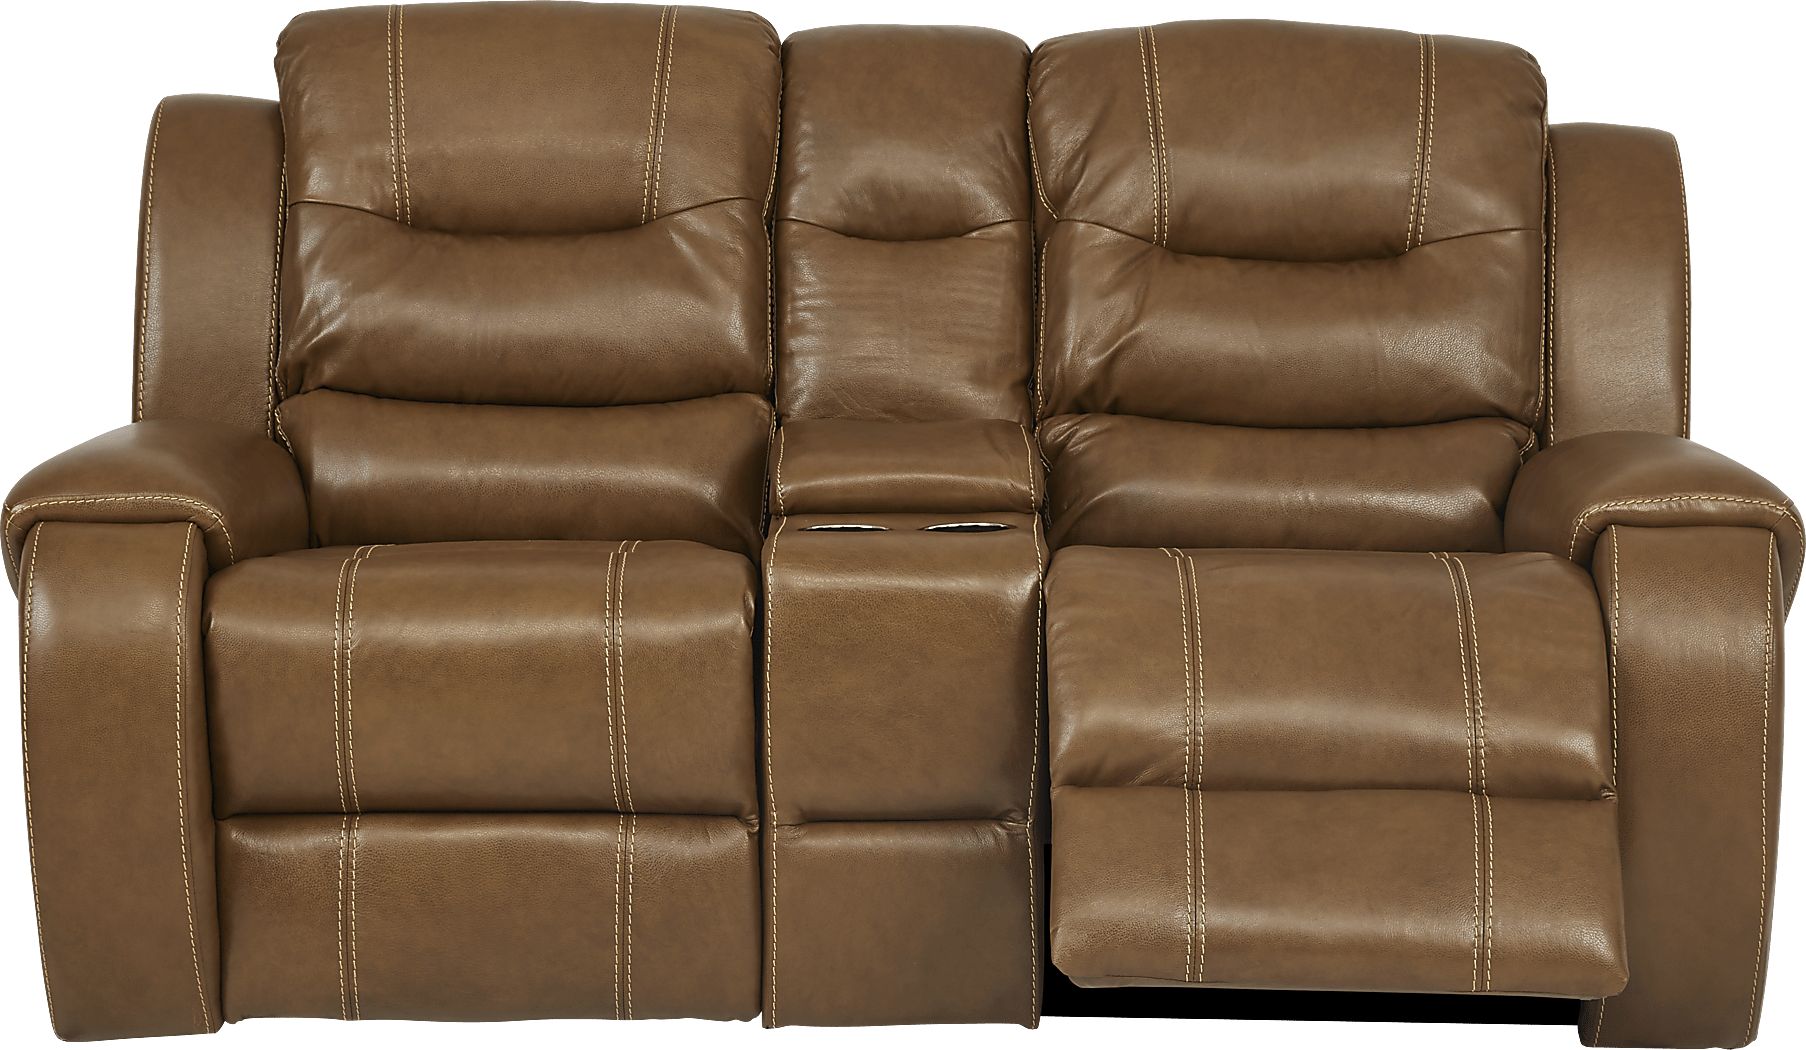 Rooms To Go High Plains Saddle Leather Reclining Console Loveseat